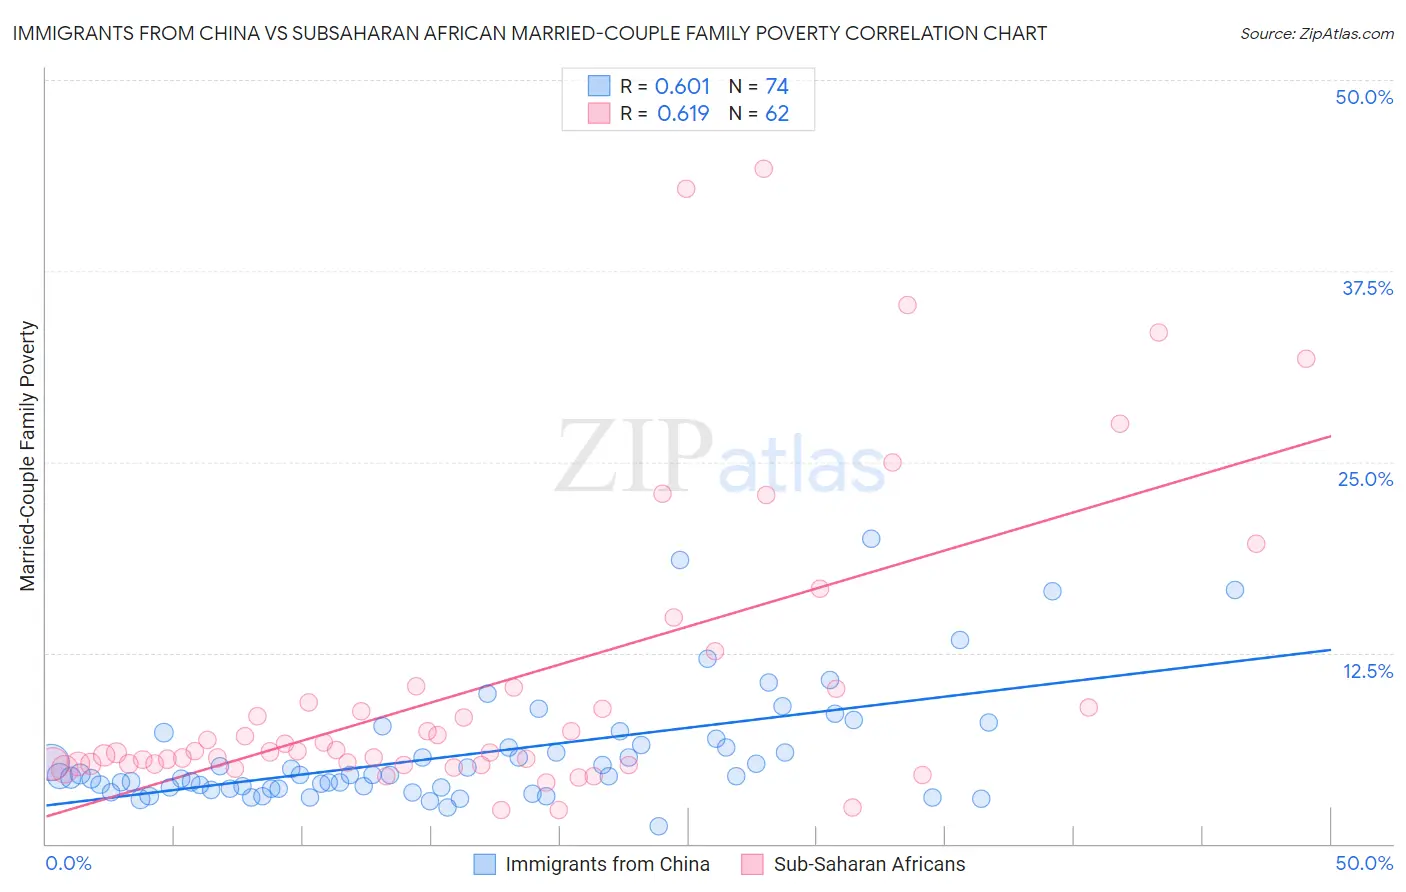 Immigrants from China vs Subsaharan African Married-Couple Family Poverty